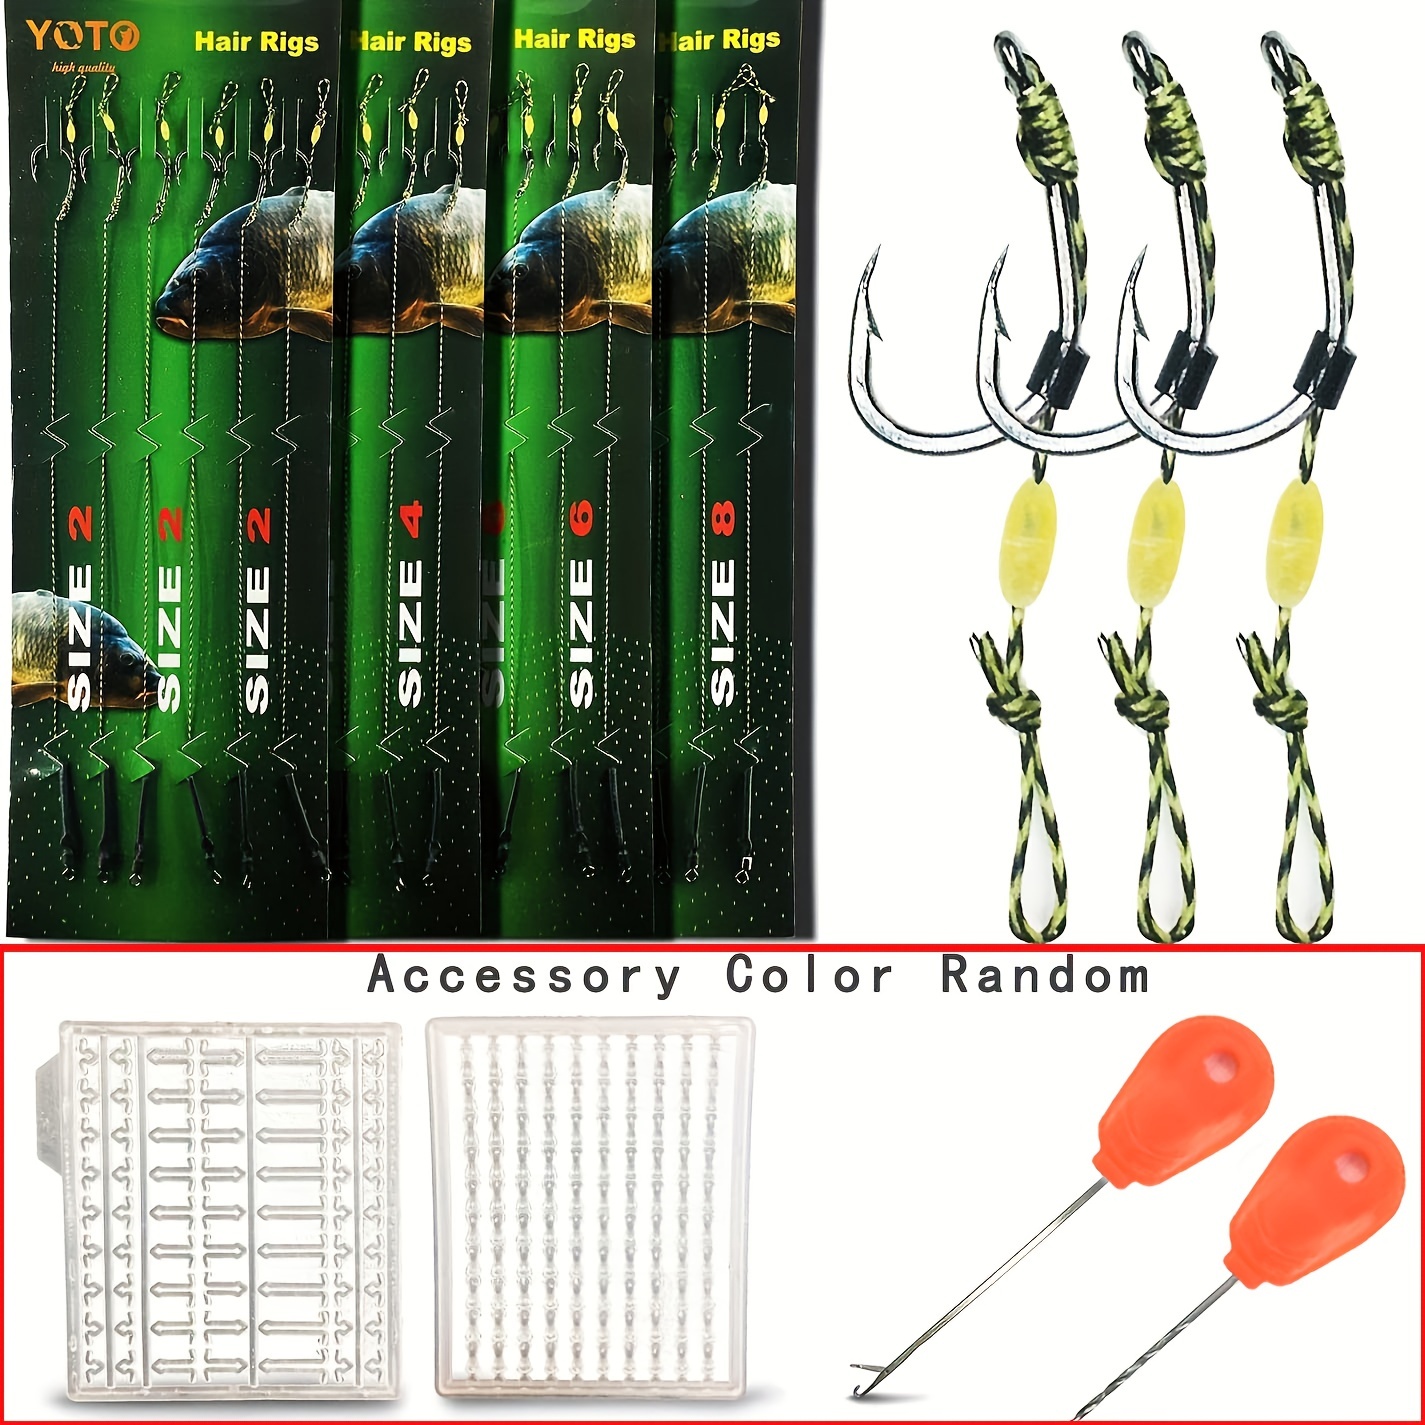 Intro to Hair Rigs - The Basic Hair Rig for Carp and Catfish